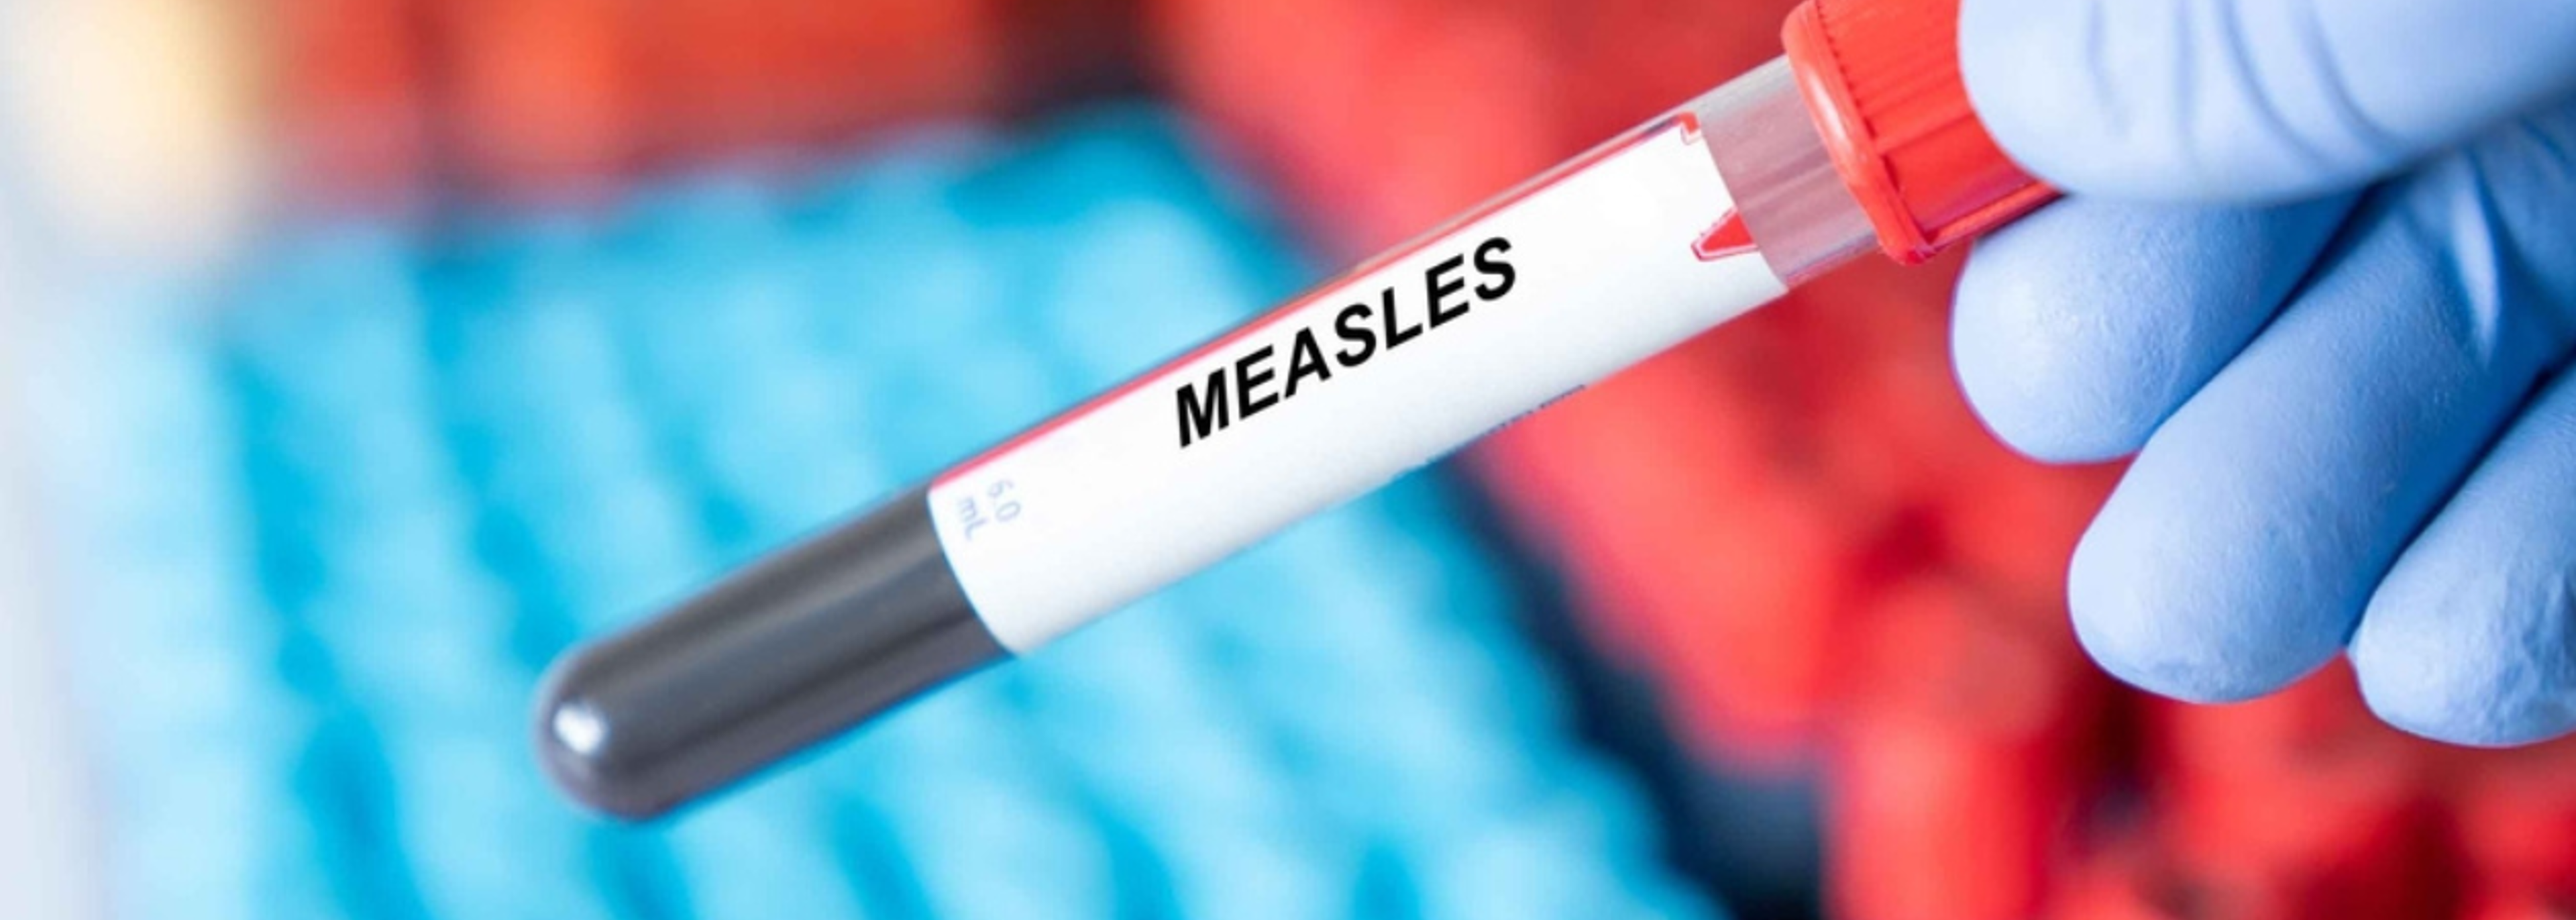 Children at risk as measles cases rise